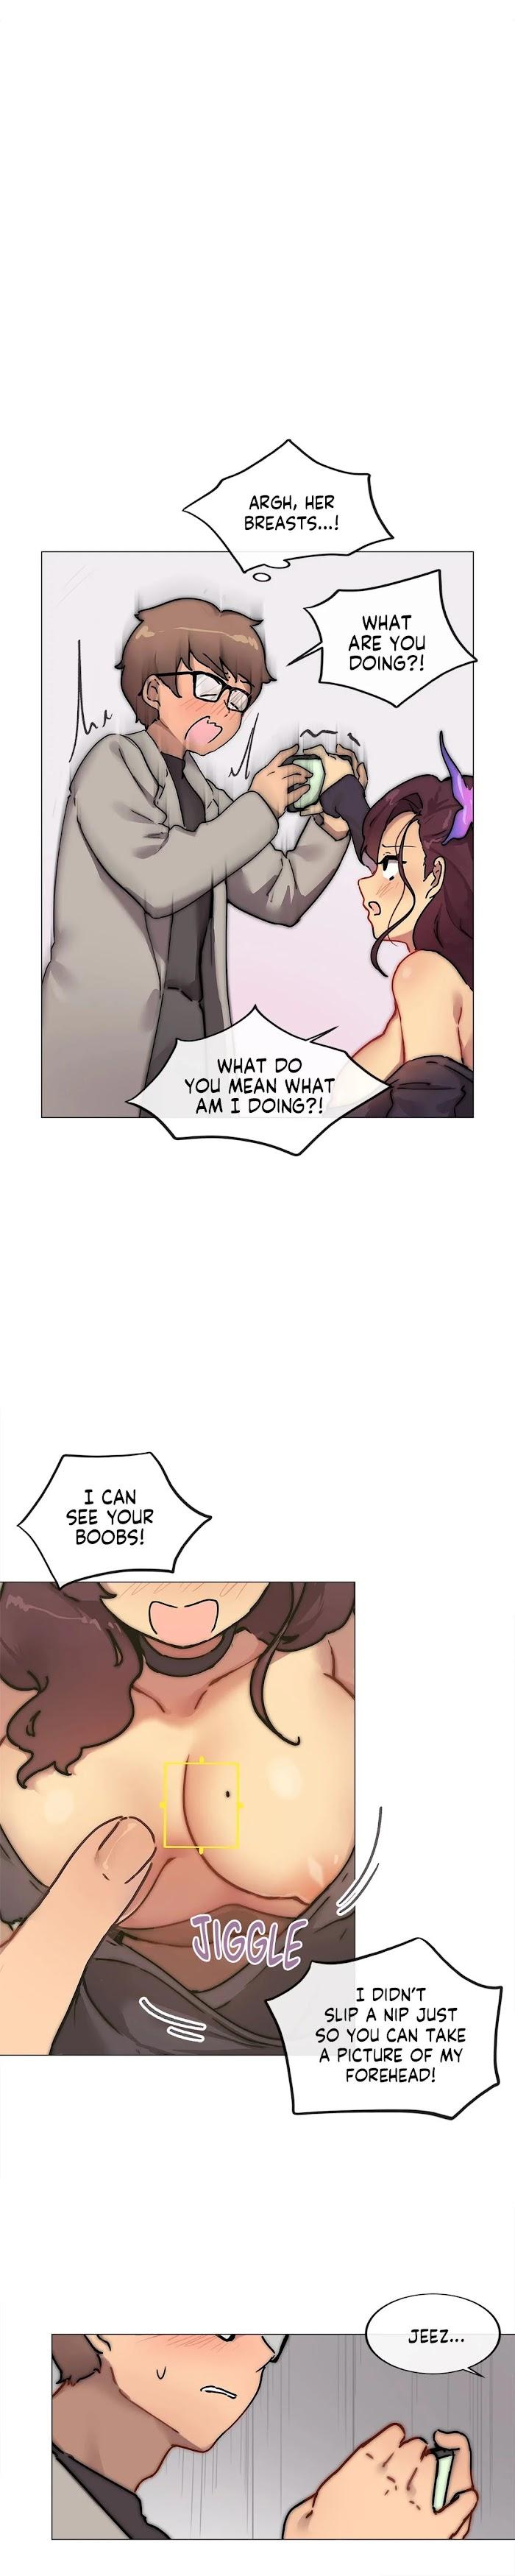 [Dumangoon, 130F] Sexcape Room: Wipe Out Ch.9/9 [English] [Manhwa PDF] Completed 49